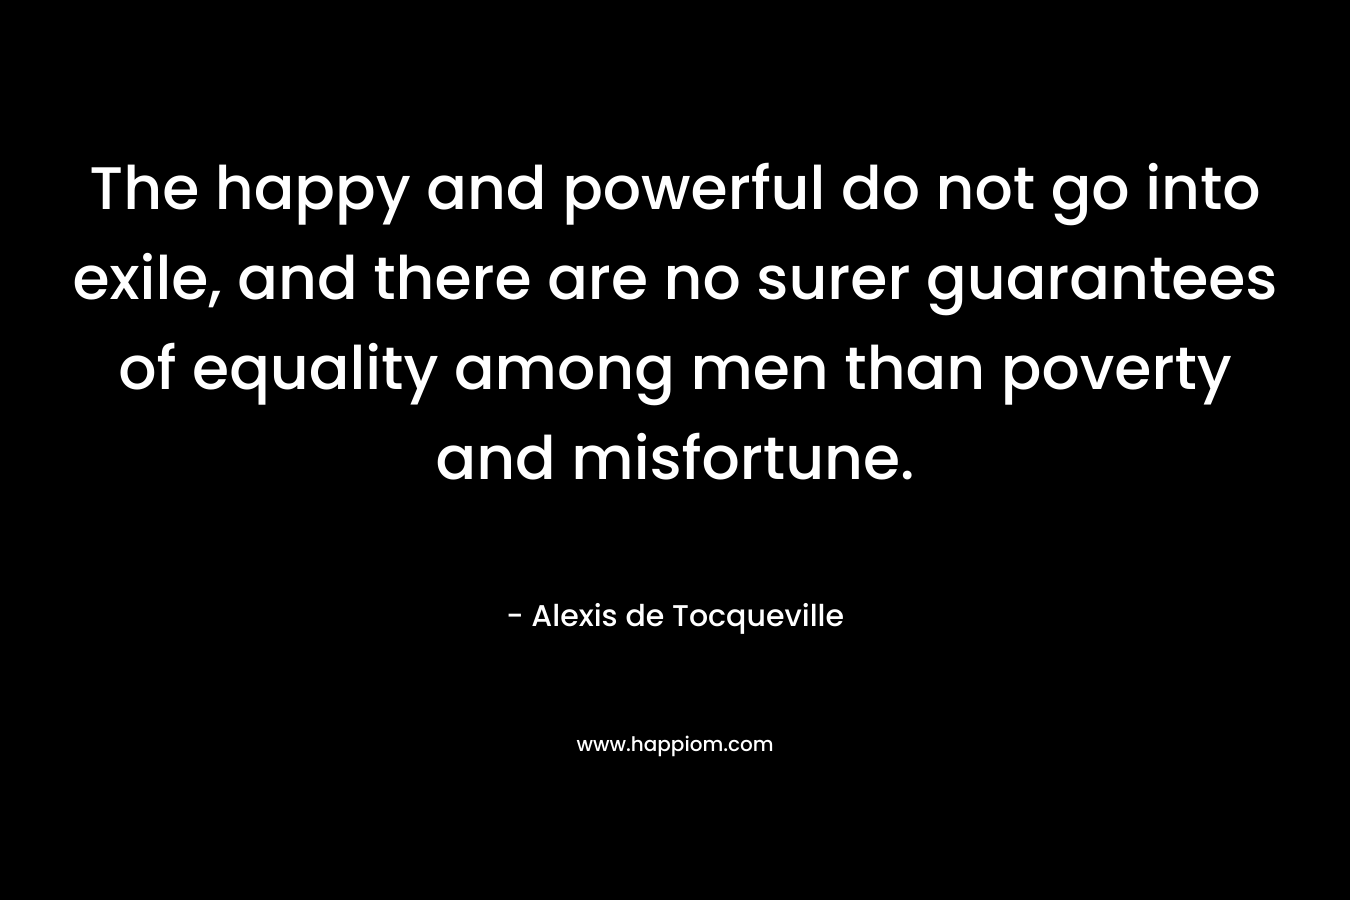 The happy and powerful do not go into exile, and there are no surer guarantees of equality among men than poverty and misfortune. – Alexis de Tocqueville